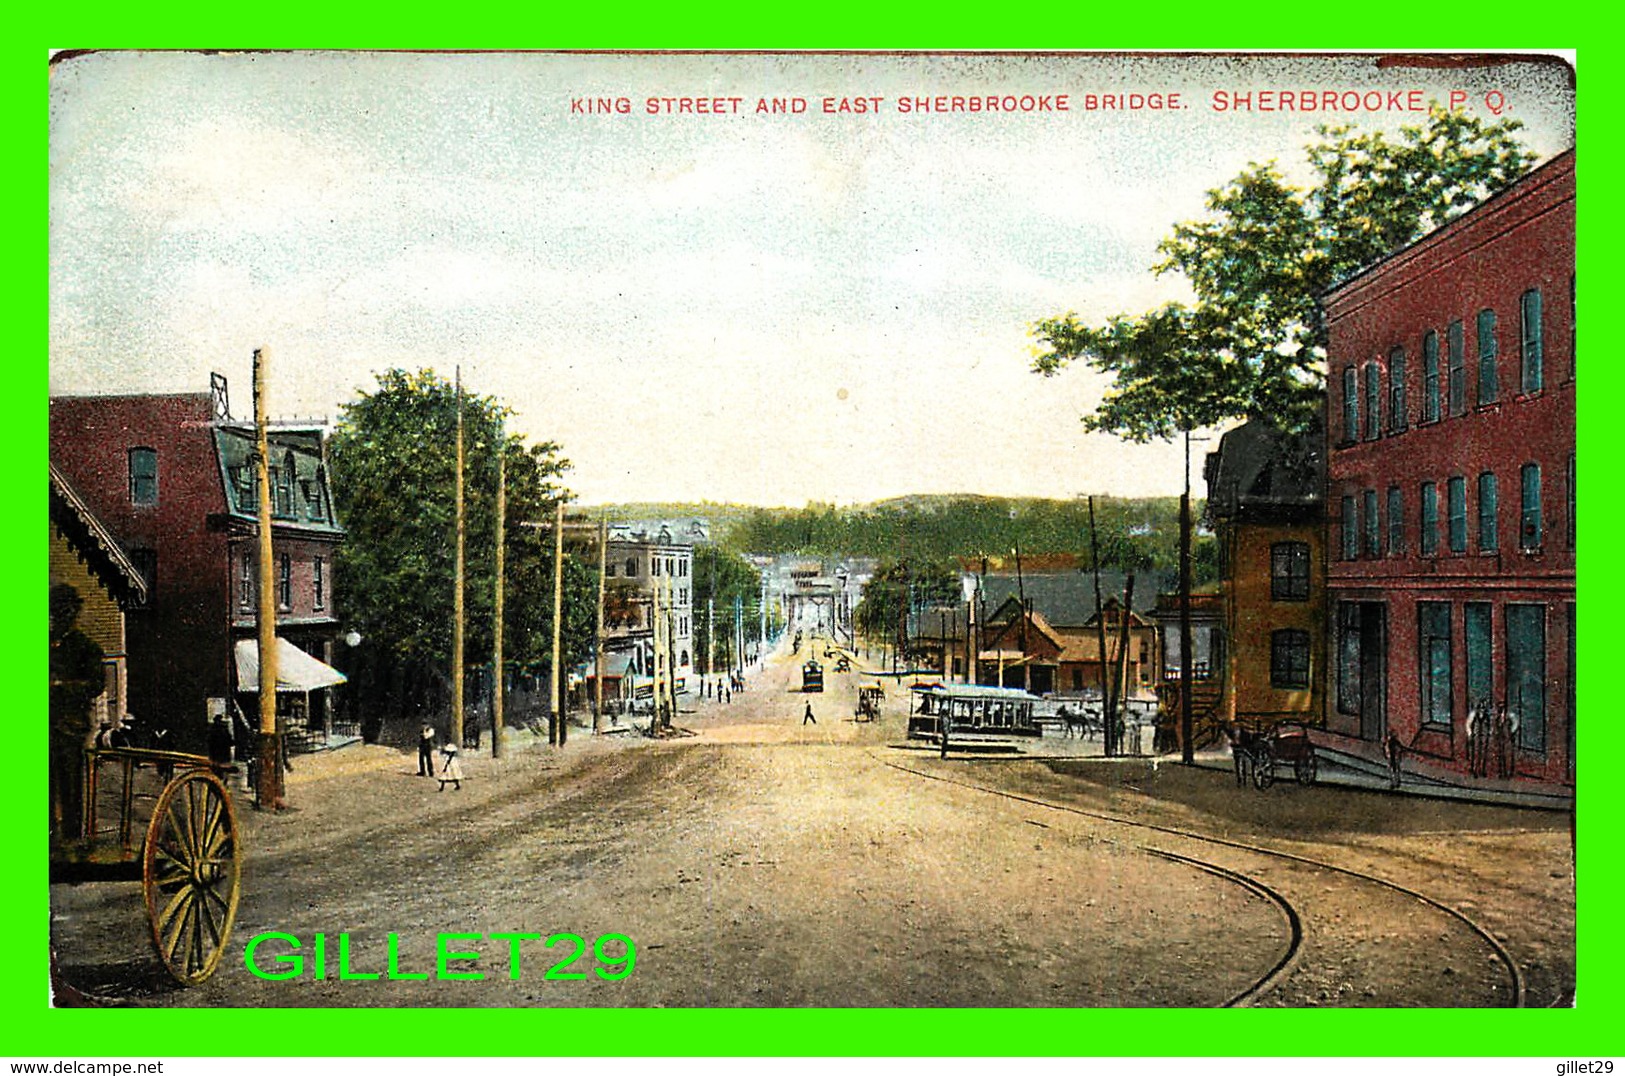 SHERBROOKE, QUÉBEC - KING STREET AND EAST SHERBROOKE BRIDGE - ANIMATED - TRAVEL IN 1907 - MONTREAL IMPORT CO - - Sherbrooke